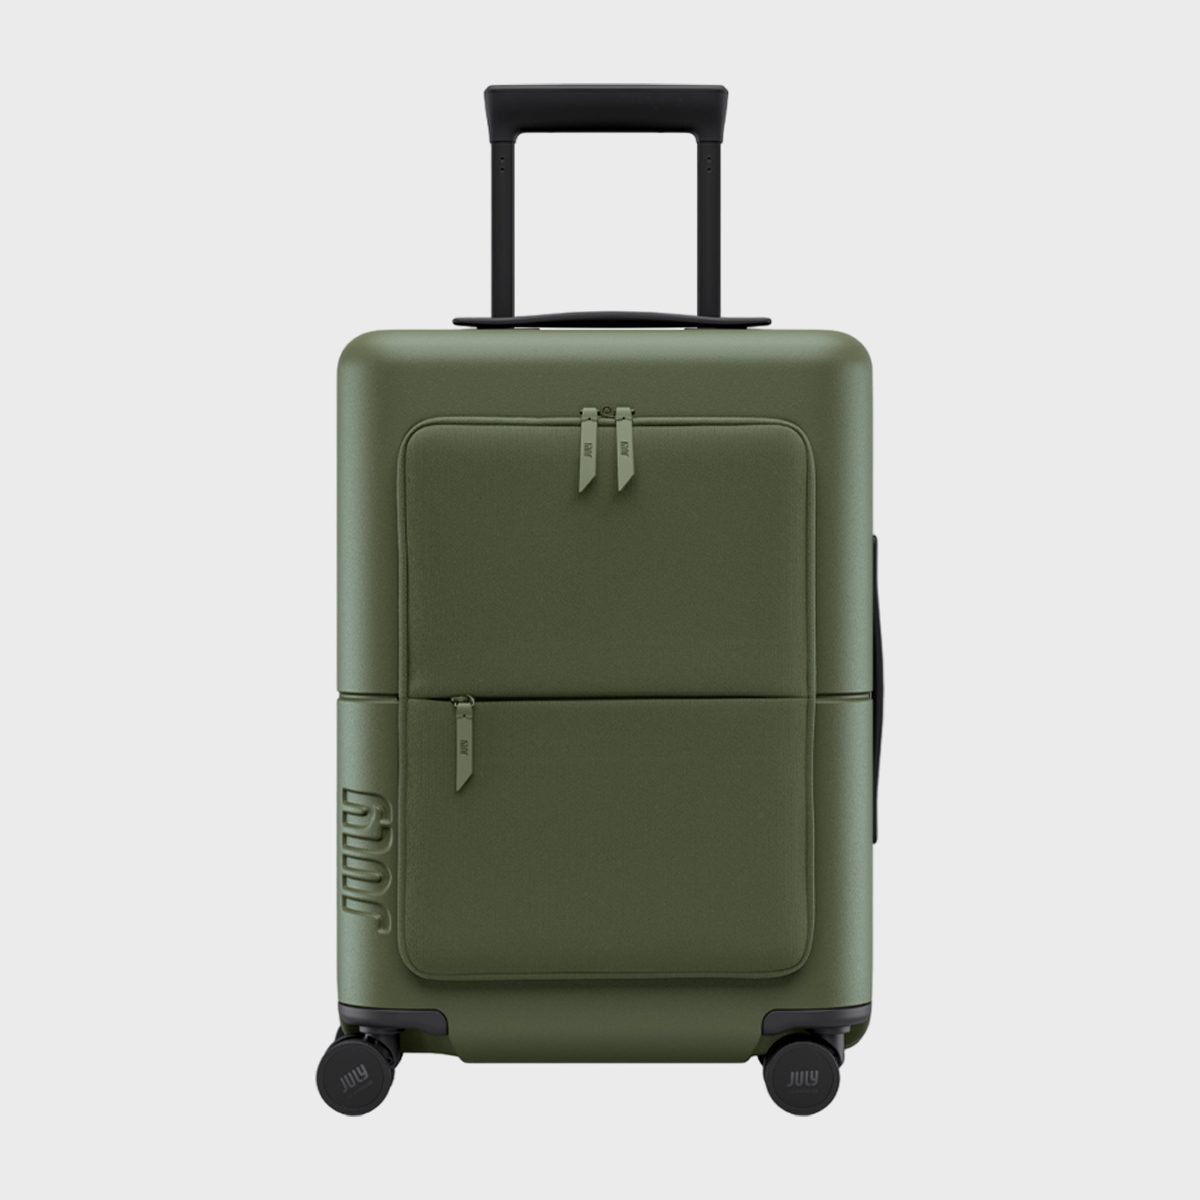 <h3>July Carry-On Pro</h3> <p>You can't go wrong with the <a href="https://july.com/us/luggage/carry-on-pro/" rel="noopener">July Carry-On Pro</a>, which is considered among the absolute best carry-on luggage bags. This <a href="https://www.rd.com/list/smart-bags-airplanes/" rel="noopener noreferrer">smart luggage</a> is equipped with a handful of noteworthy features. Among them include a detachable padded sleeve (perfect for storing your laptop and other trusty tech and <a href="https://www.rd.com/list/travel-checklist-essentials/">travel essentials</a>), a built-in hidden laundry bag (to keep clean and dirty clothes separated), a TSA-approved lock (for added security) and an ejectable battery (perfect for on-the-go charging). The exterior features a durable polycarbonate shell while the interior is equipped with a water- and stain-resistant nylon lining.</p> <p>"Worth every penny," writes verified buyer Shon B. "Best carry-on I’ve ever owned. Rolls smoothly, has plenty of room and the detachable computer case is next level. The charging station is so convenient! Bought a second for my husband."</p> <p><strong>Pros</strong></p> <ul> <li>Bonus features like a detachable padded sleeve, TSA lock, ejectable battery and hidden laundry bag</li> <li>Sleek and sturdy hardshell construction</li> <li>Lifetime warranty</li> <li>100-day free trial</li> </ul> <p><strong>Cons</strong></p> <ul> <li>Pricey</li> <li>Does not expand</li> </ul> <p class="listicle-page__cta-button-shop"><a class="shop-btn" href="https://july.com/us/luggage/carry-on-pro/">Shop Now</a></p>